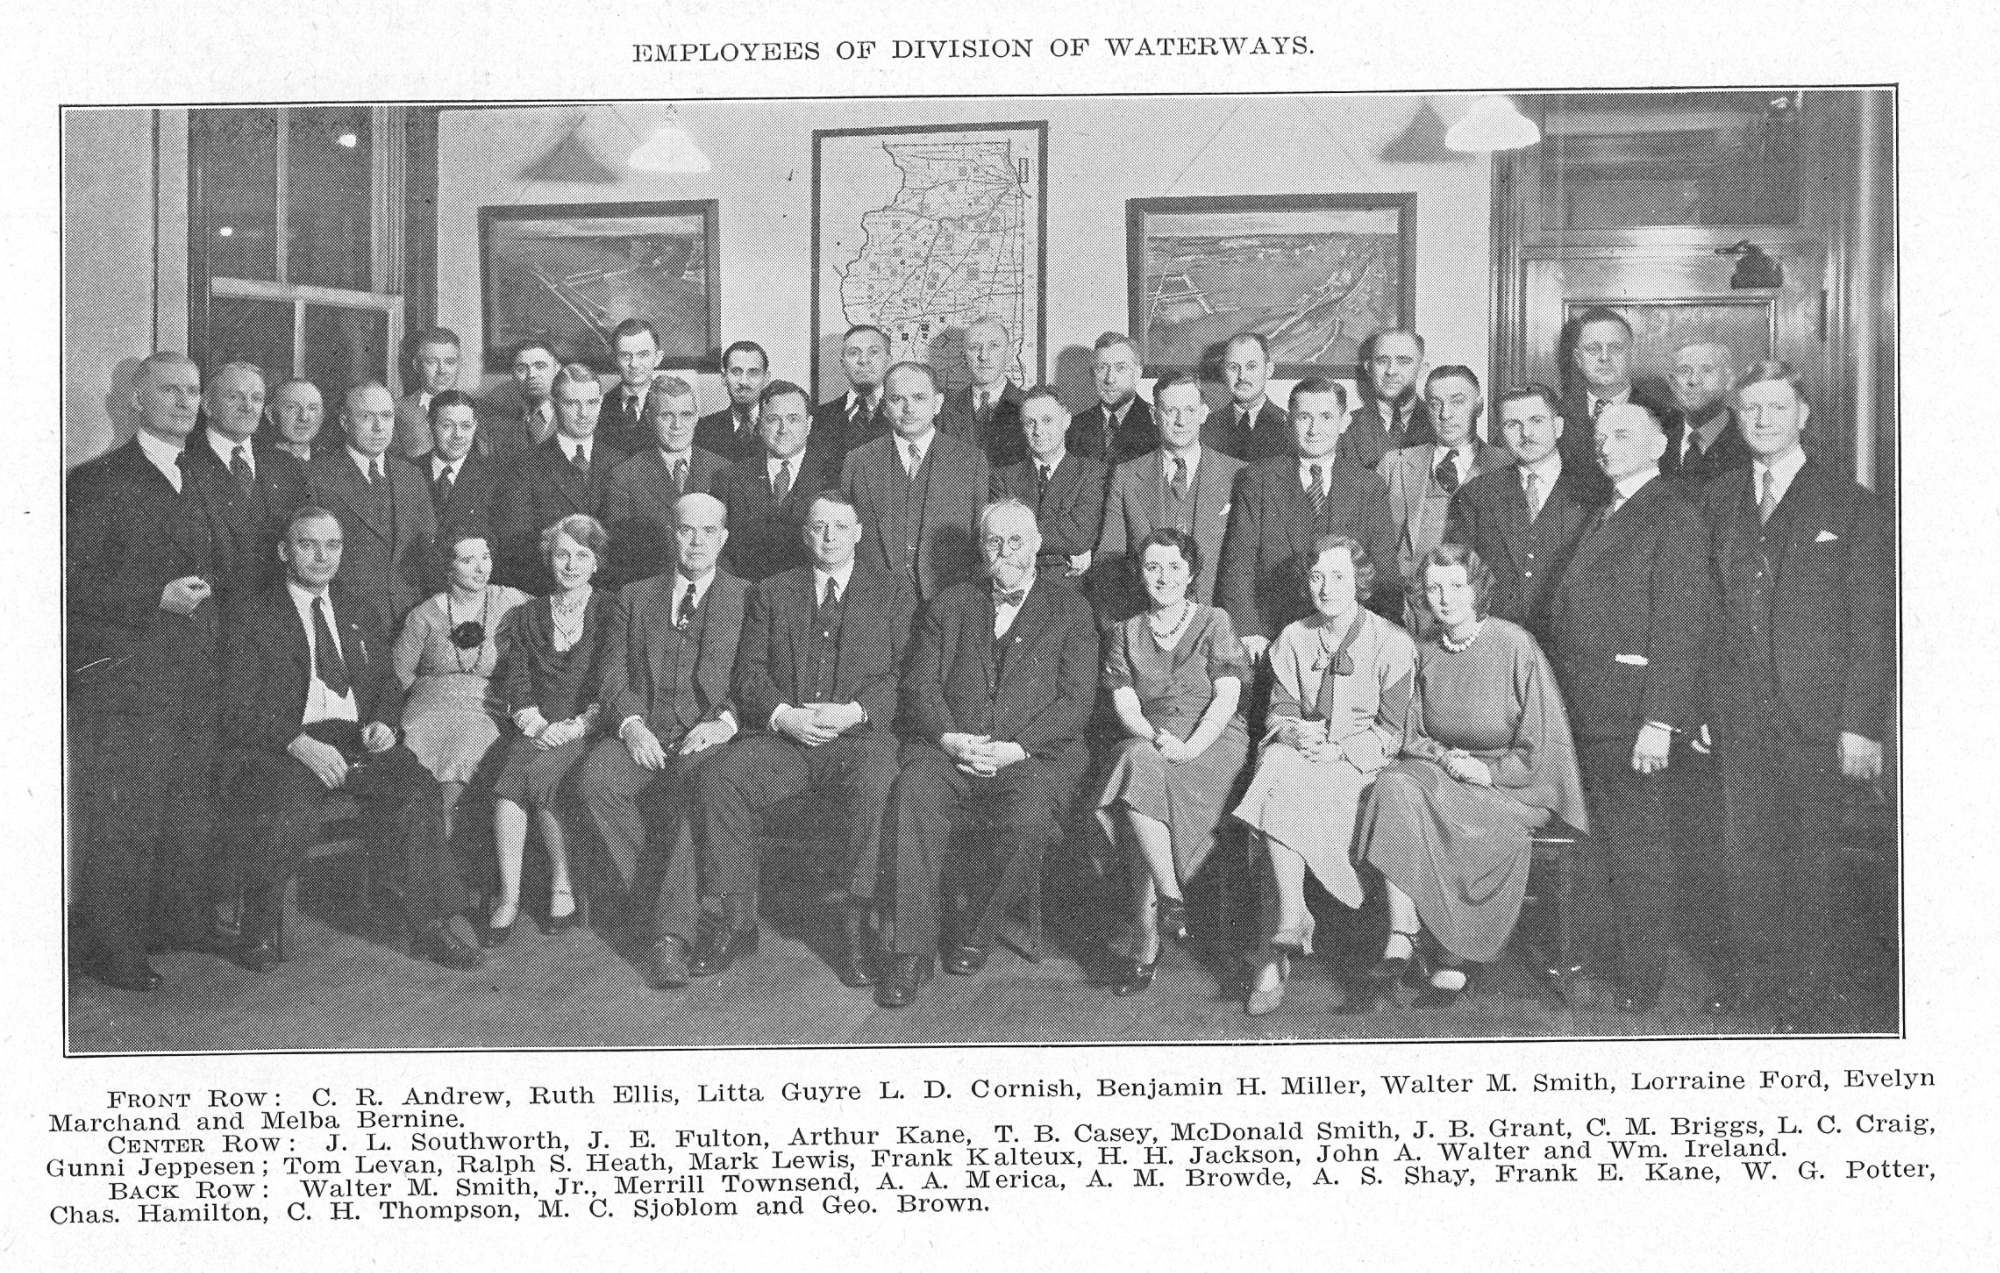 1917-1925: newspaper image of employees of the Division of Waterways